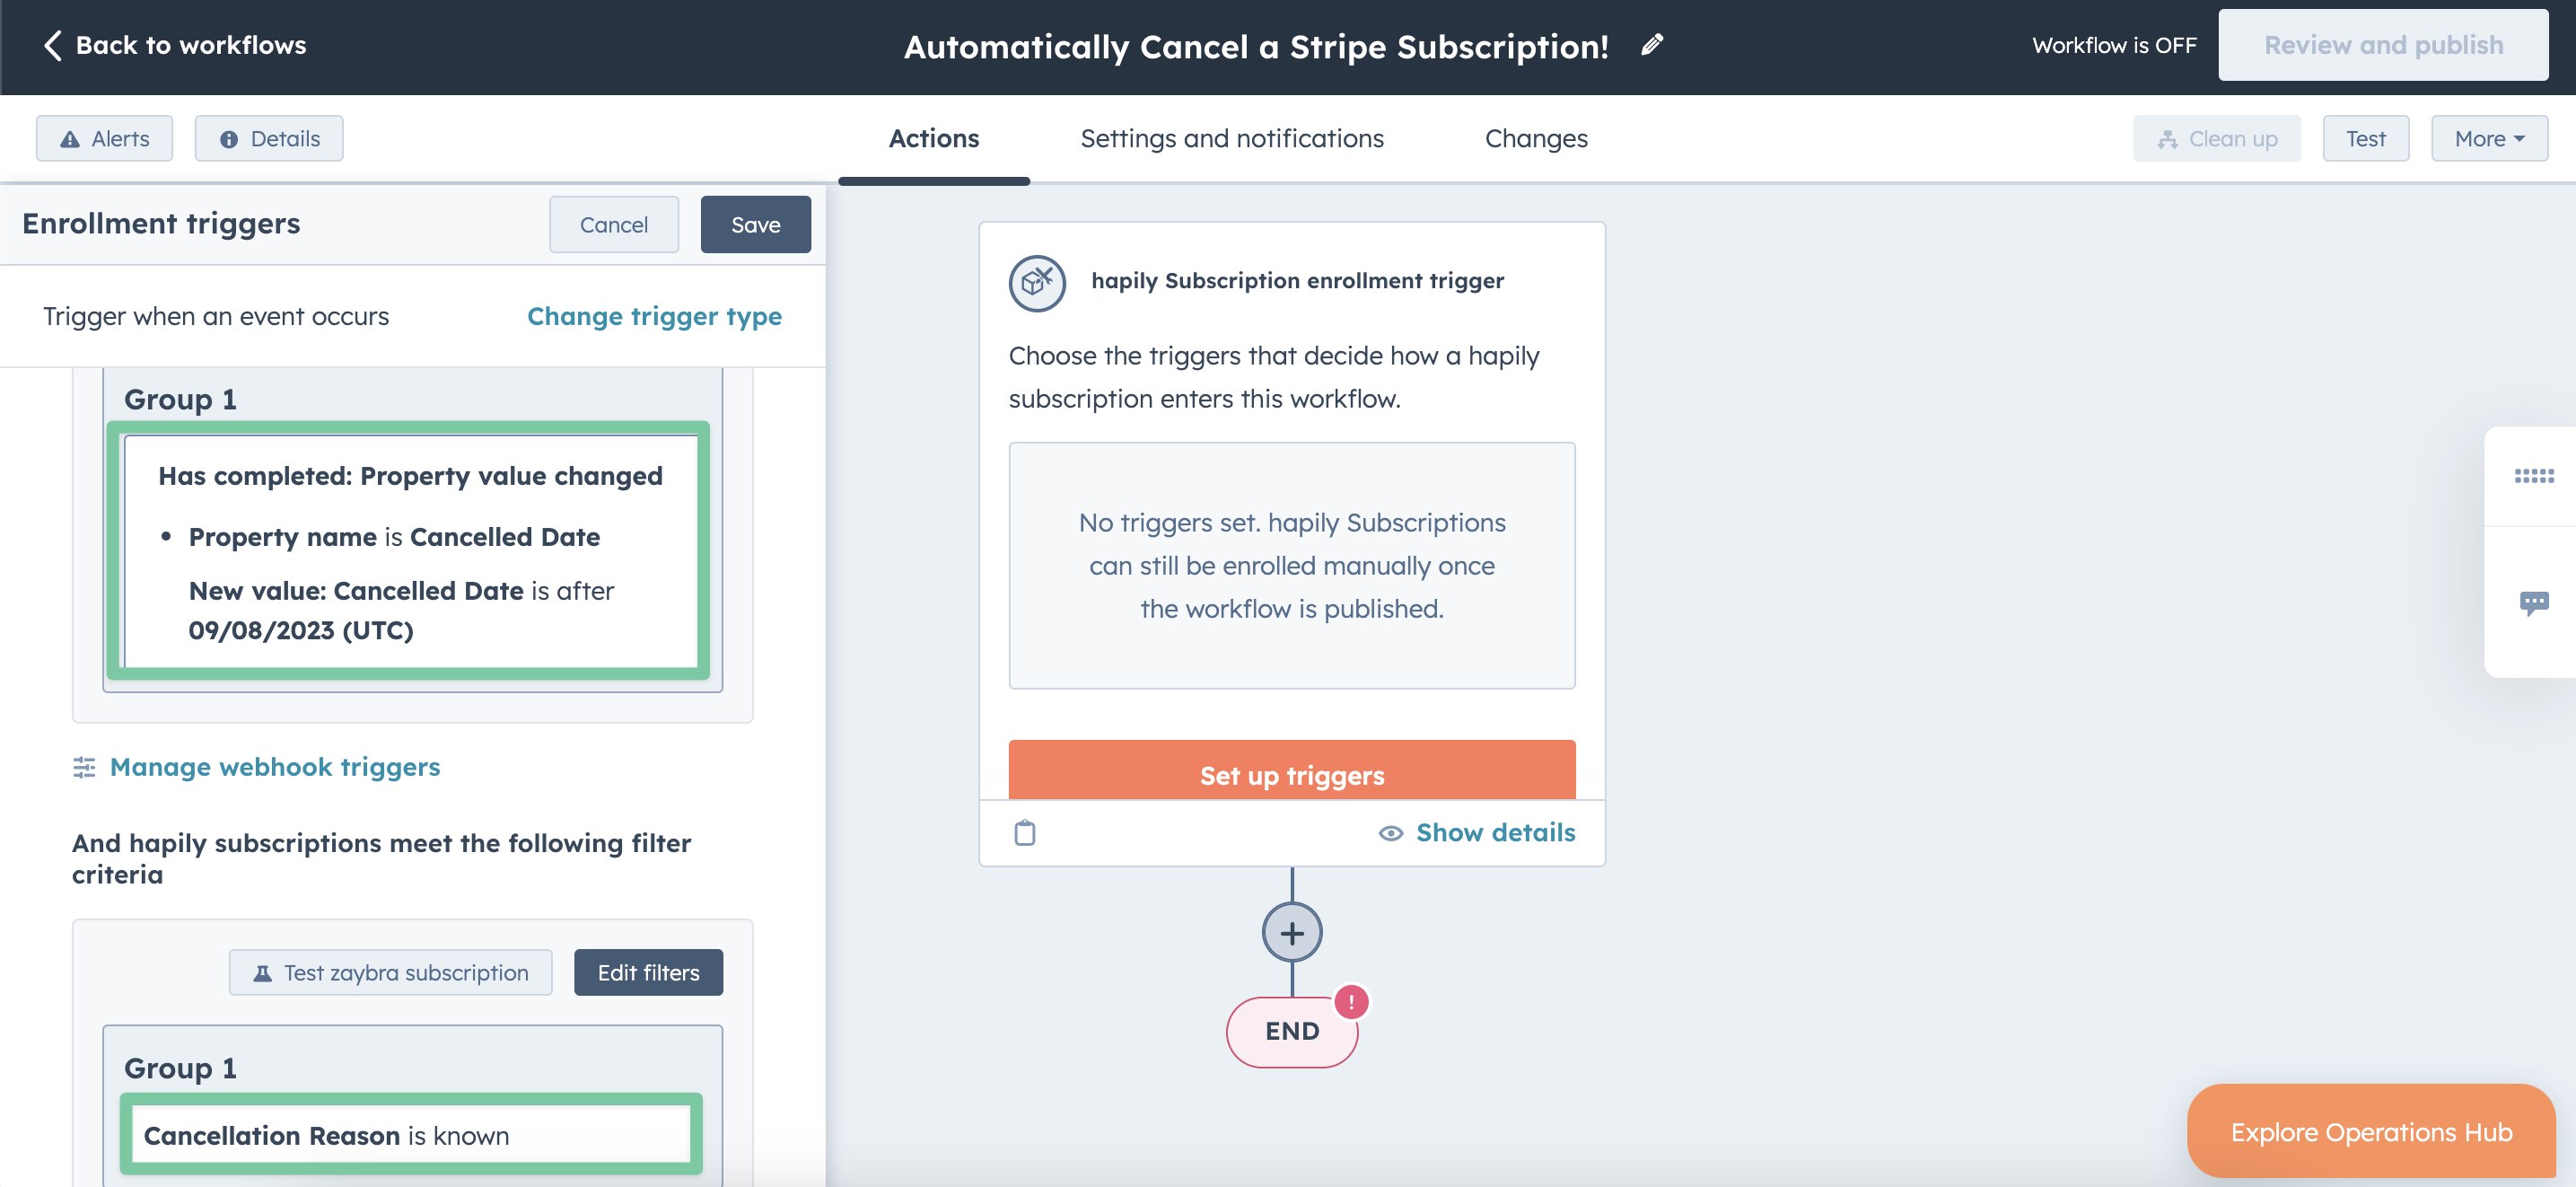 How to automatically cancel a Stripe subscription using HubSpot workflows